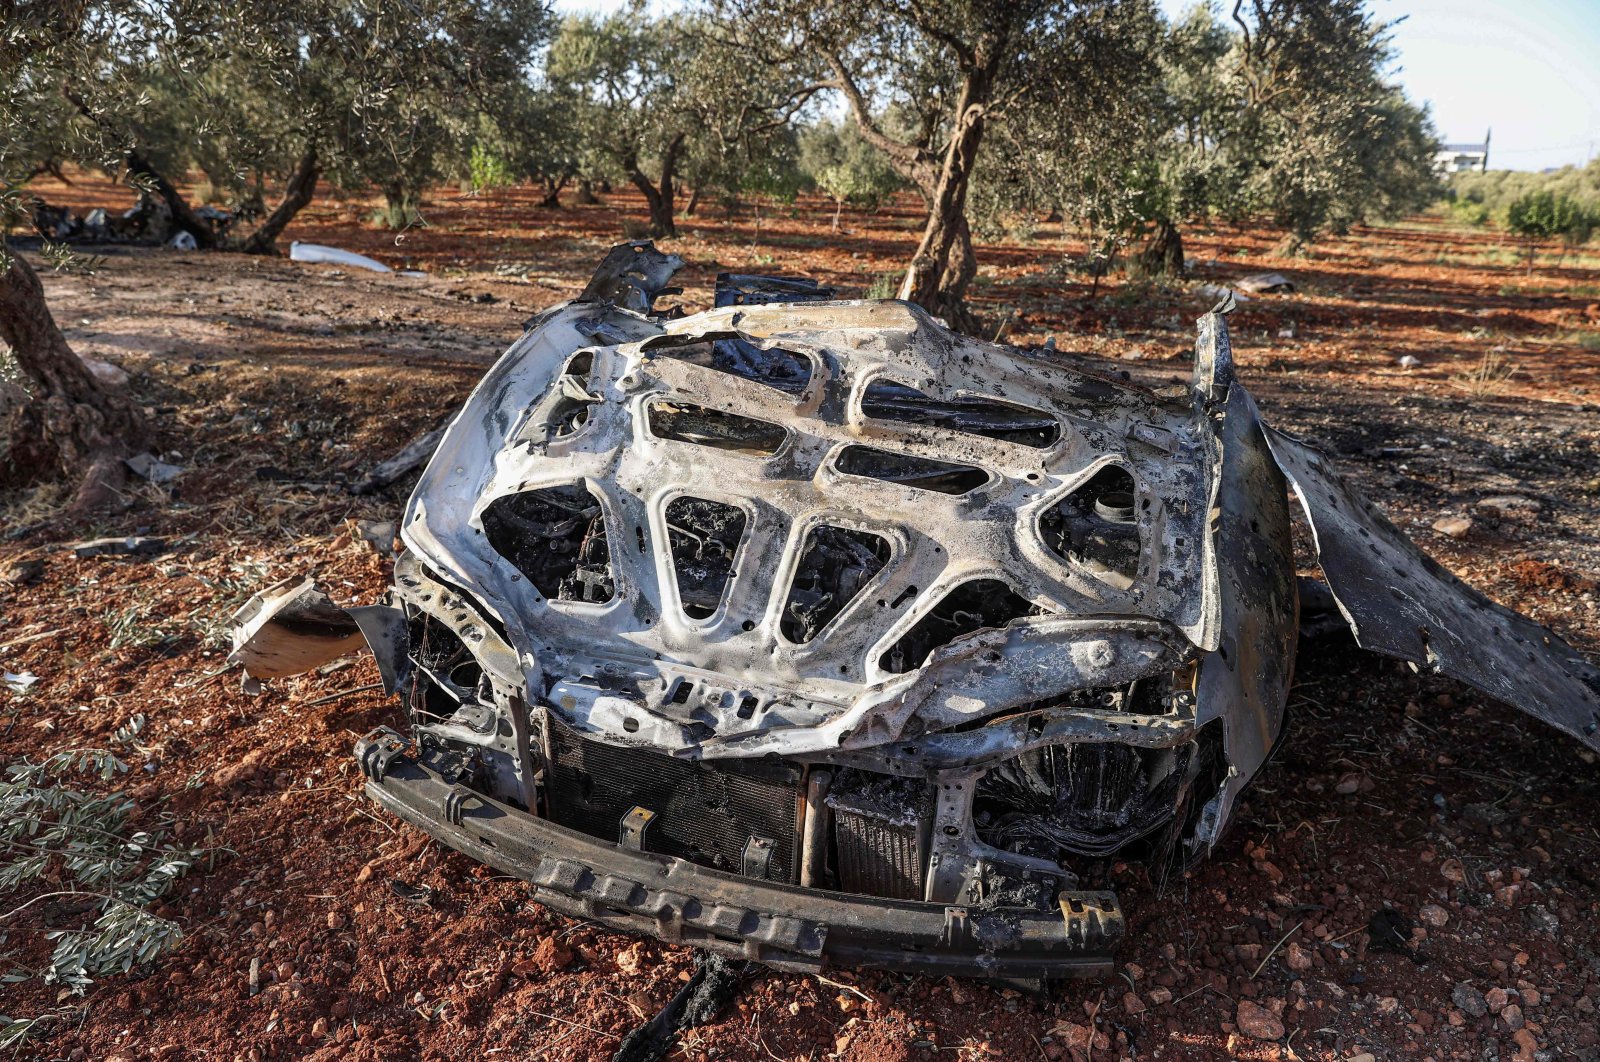 A view of the vehicle destroyed by what is believed to be a drone strike, on the northeastern outskirts of Idlib, Syria, Sept. 20, 2021. (AFP Photo)